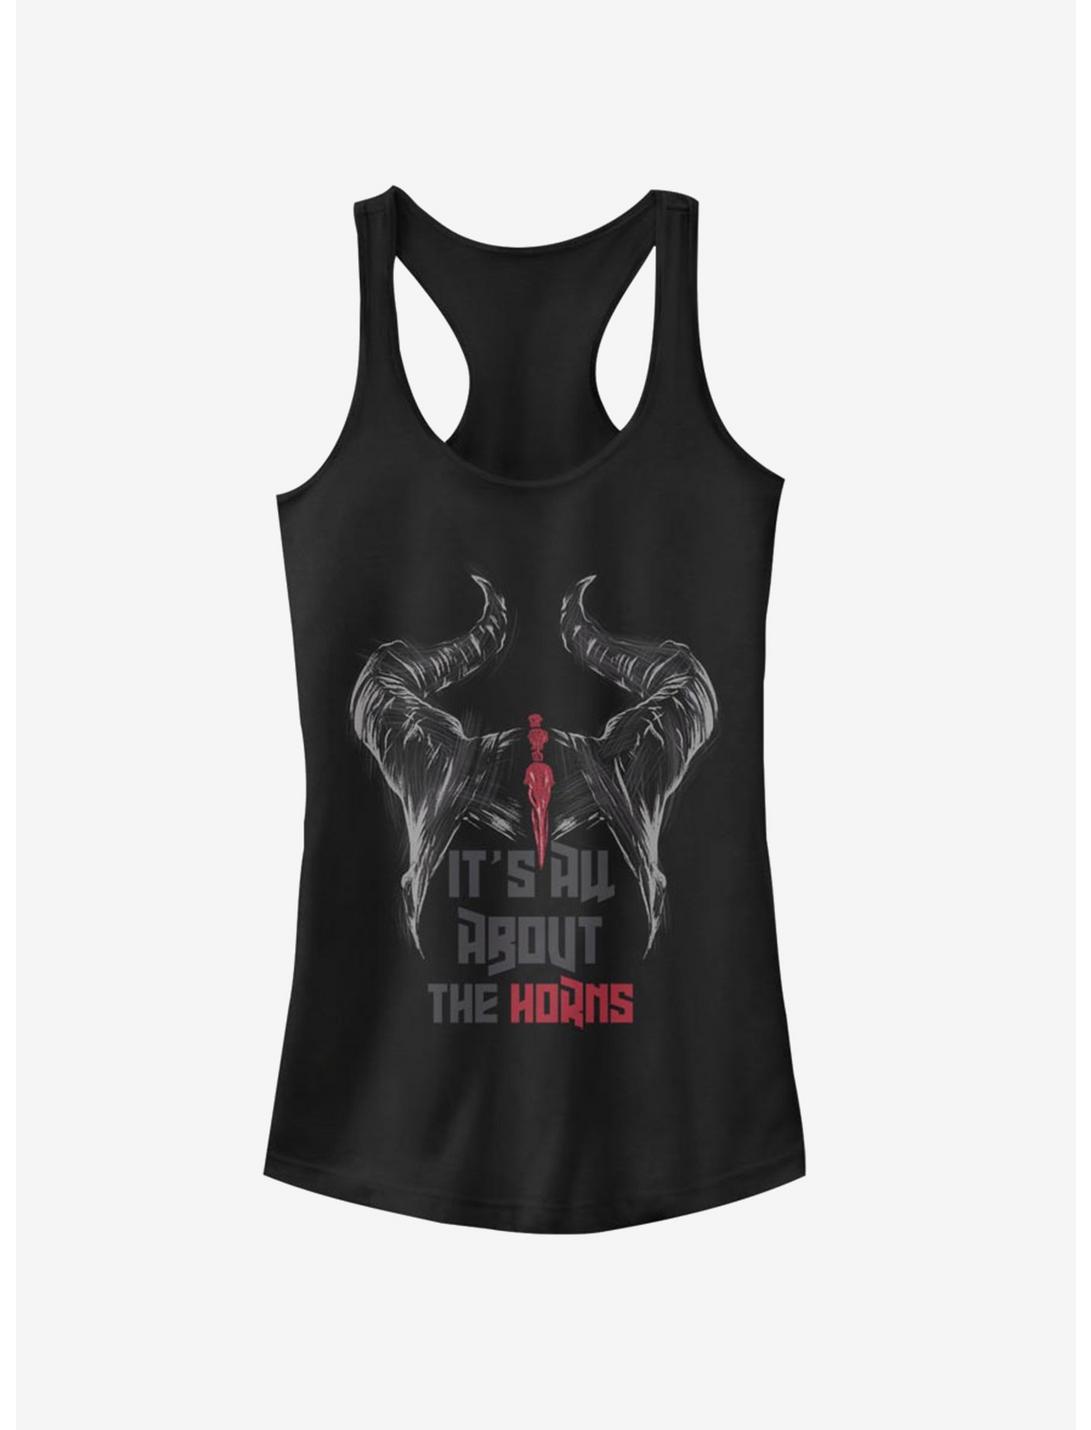 Disney Maleficent: Mistress Of Evil It's All About The Horns Girls Tank, BLACK, hi-res